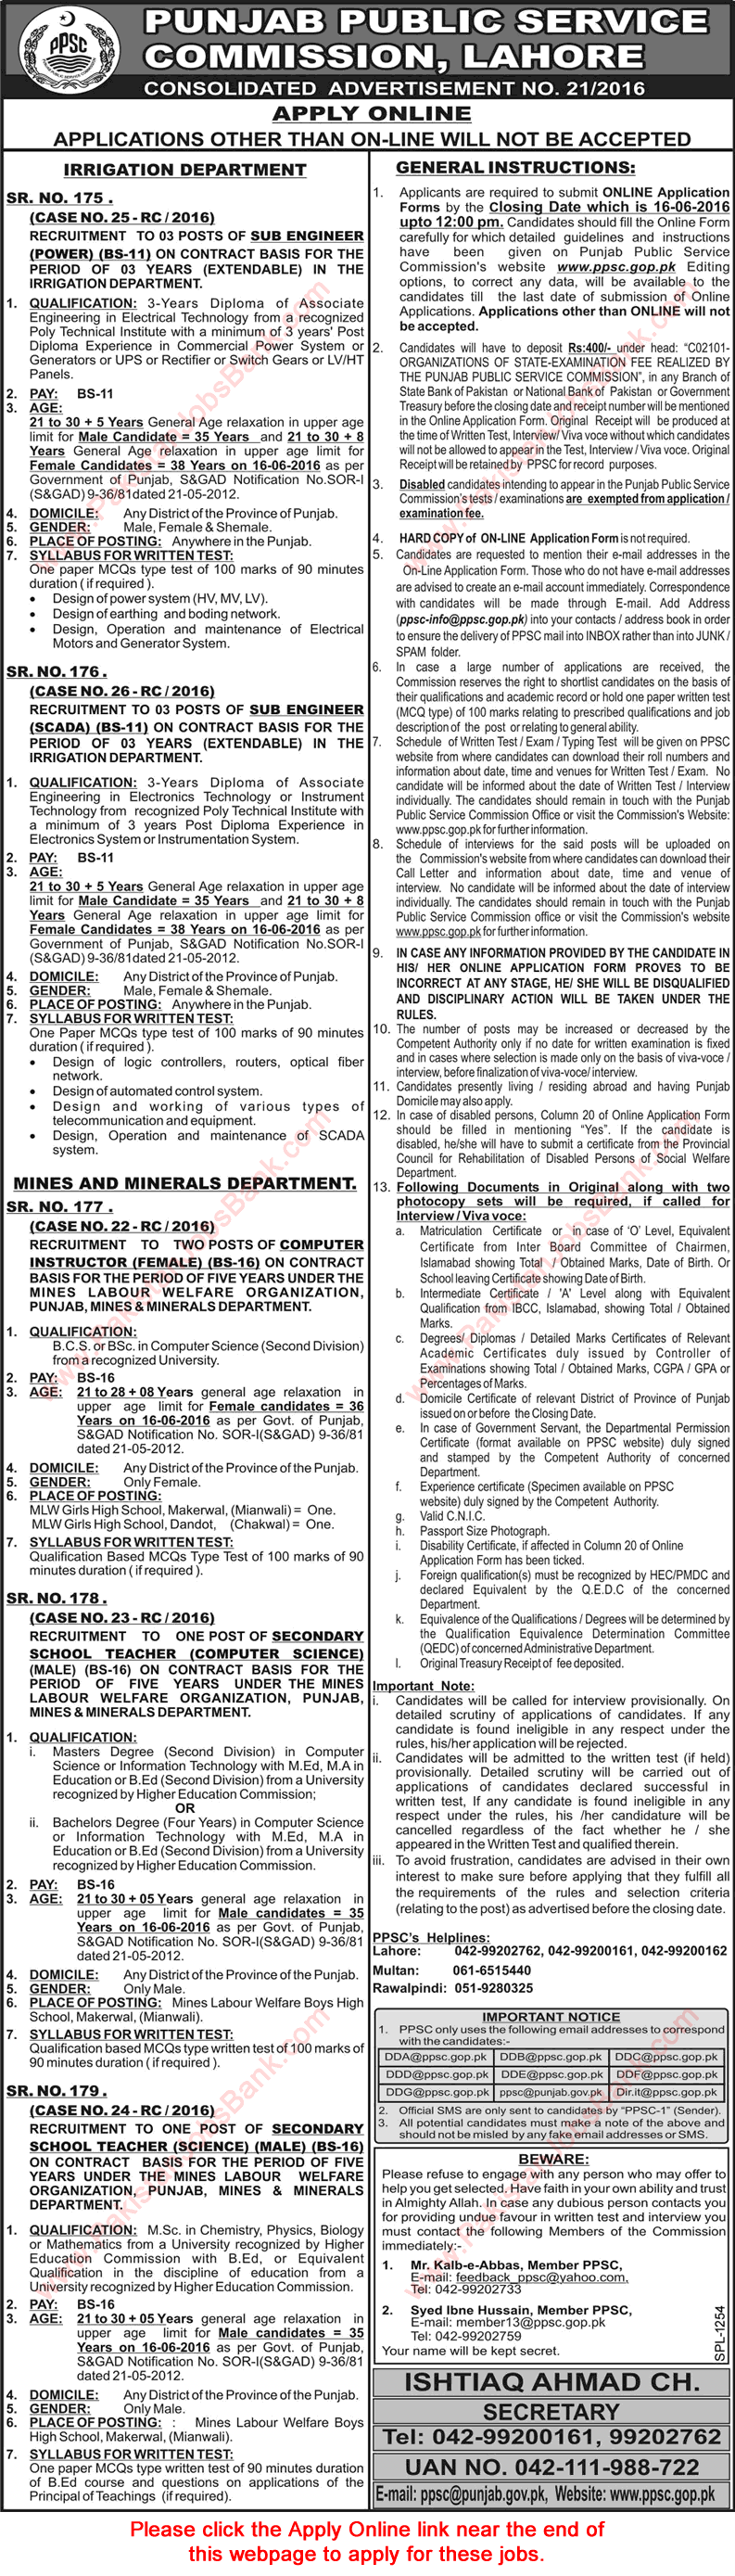 PPSC Jobs June 2016 Consolidated Advertisement No 21/2016 Apply Online Latest